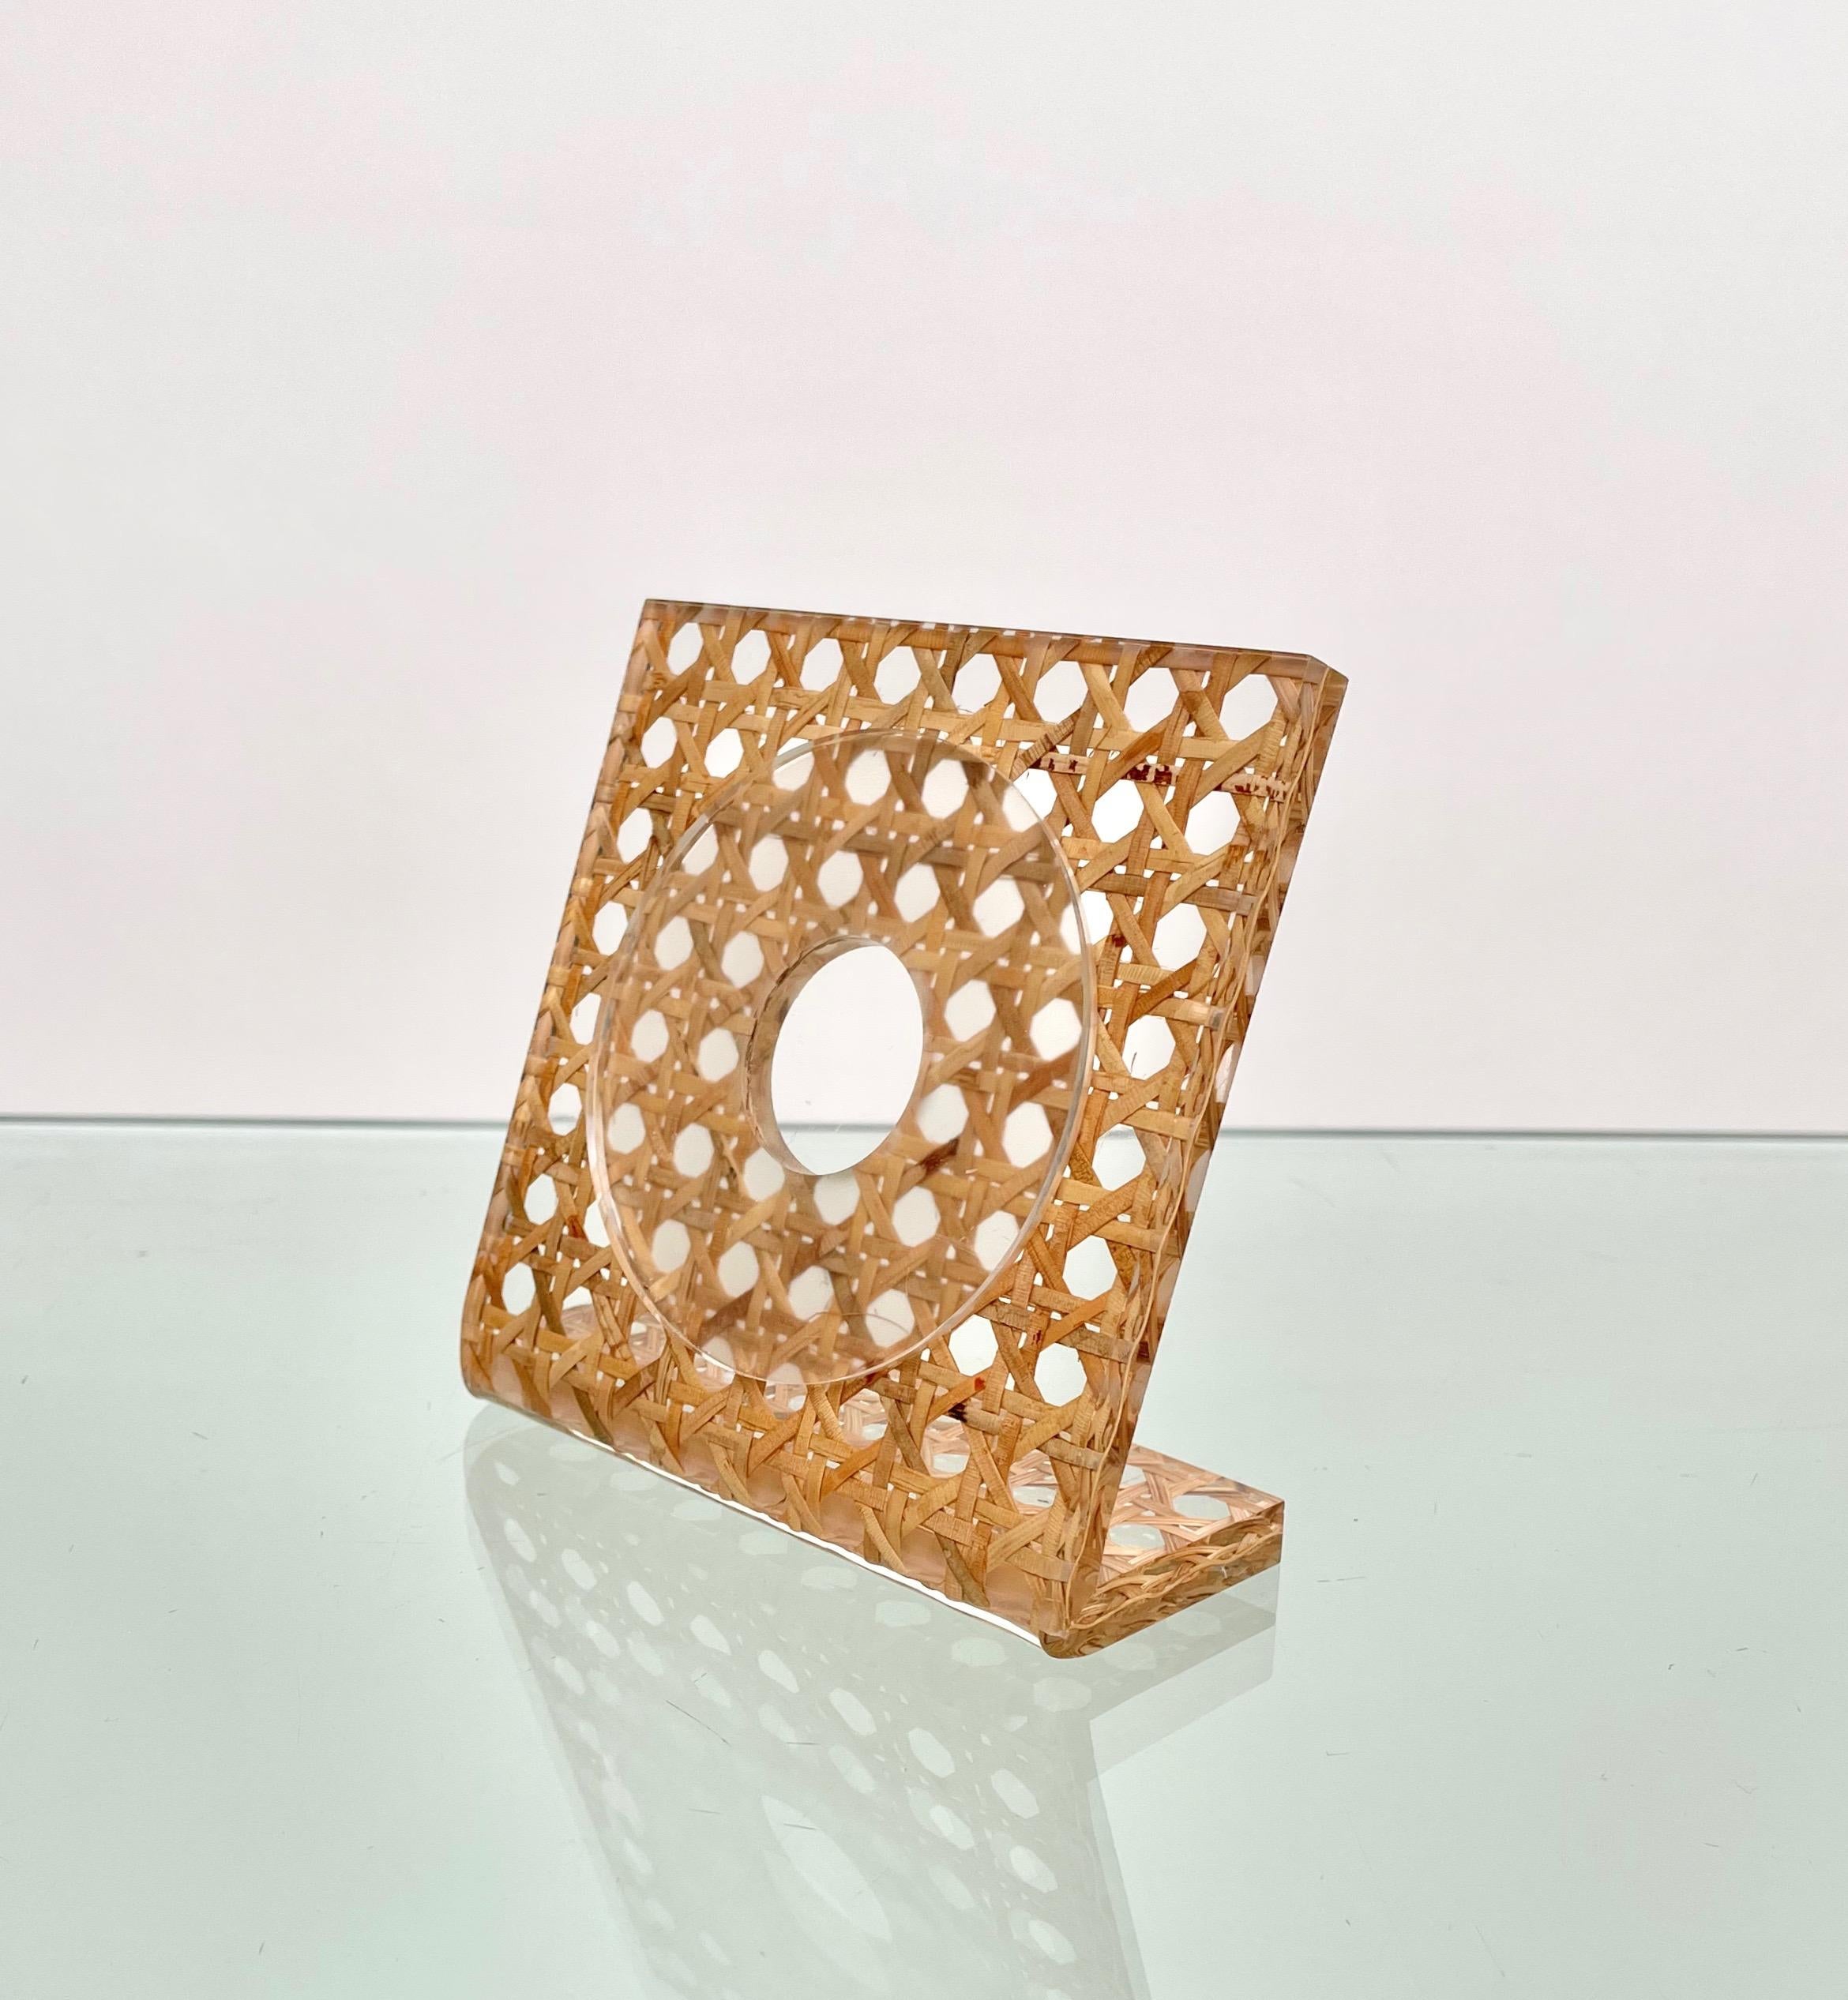 Cane Pair of Lucite & Rattan Squared Picture Frame Christian Dior Style, Italy, 1970s For Sale